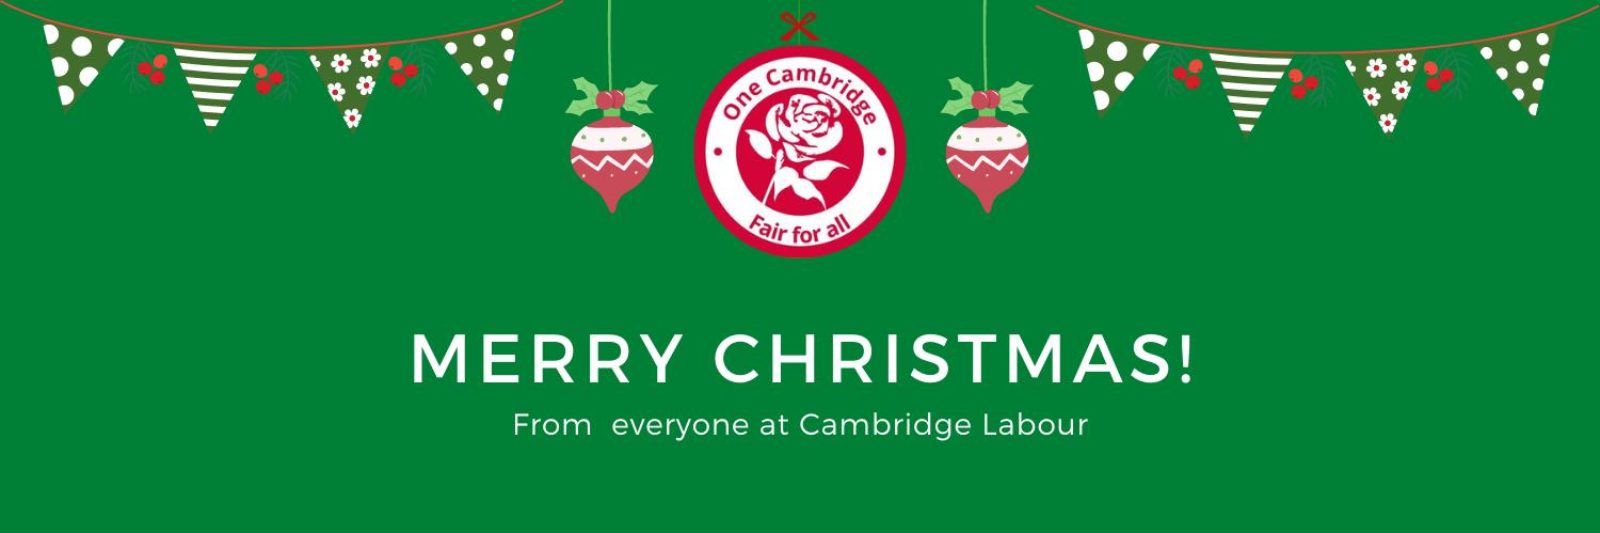 Merry Christmas message from Cambridge Labour